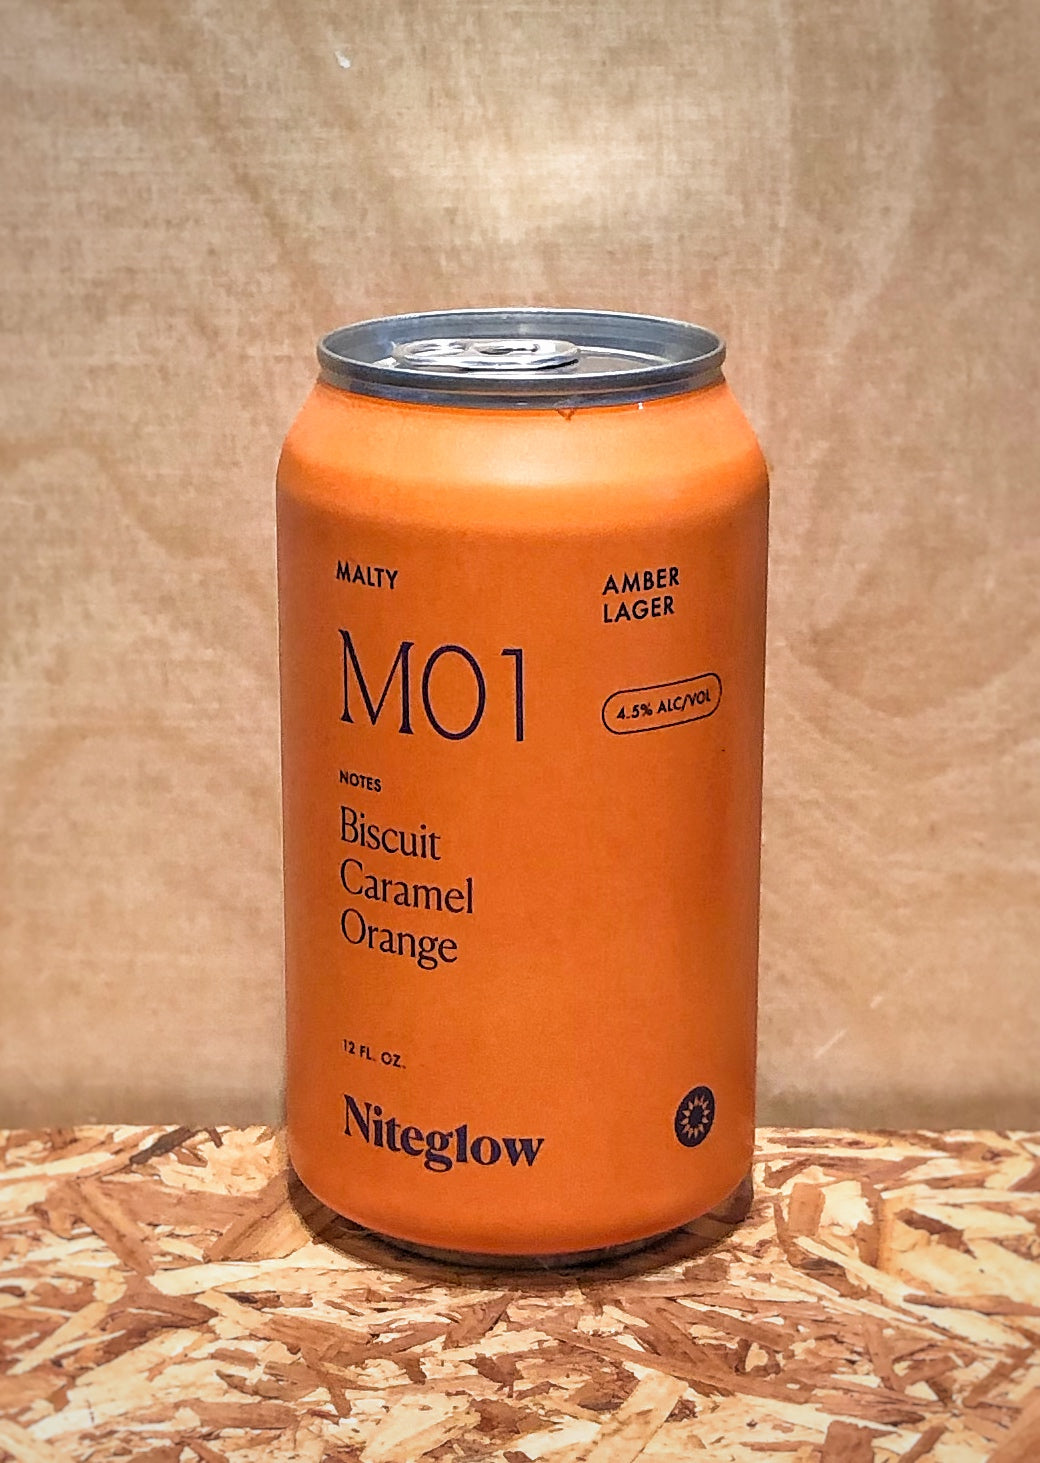 Niteglow 'M01' Amber Lager (Chicago, IL)